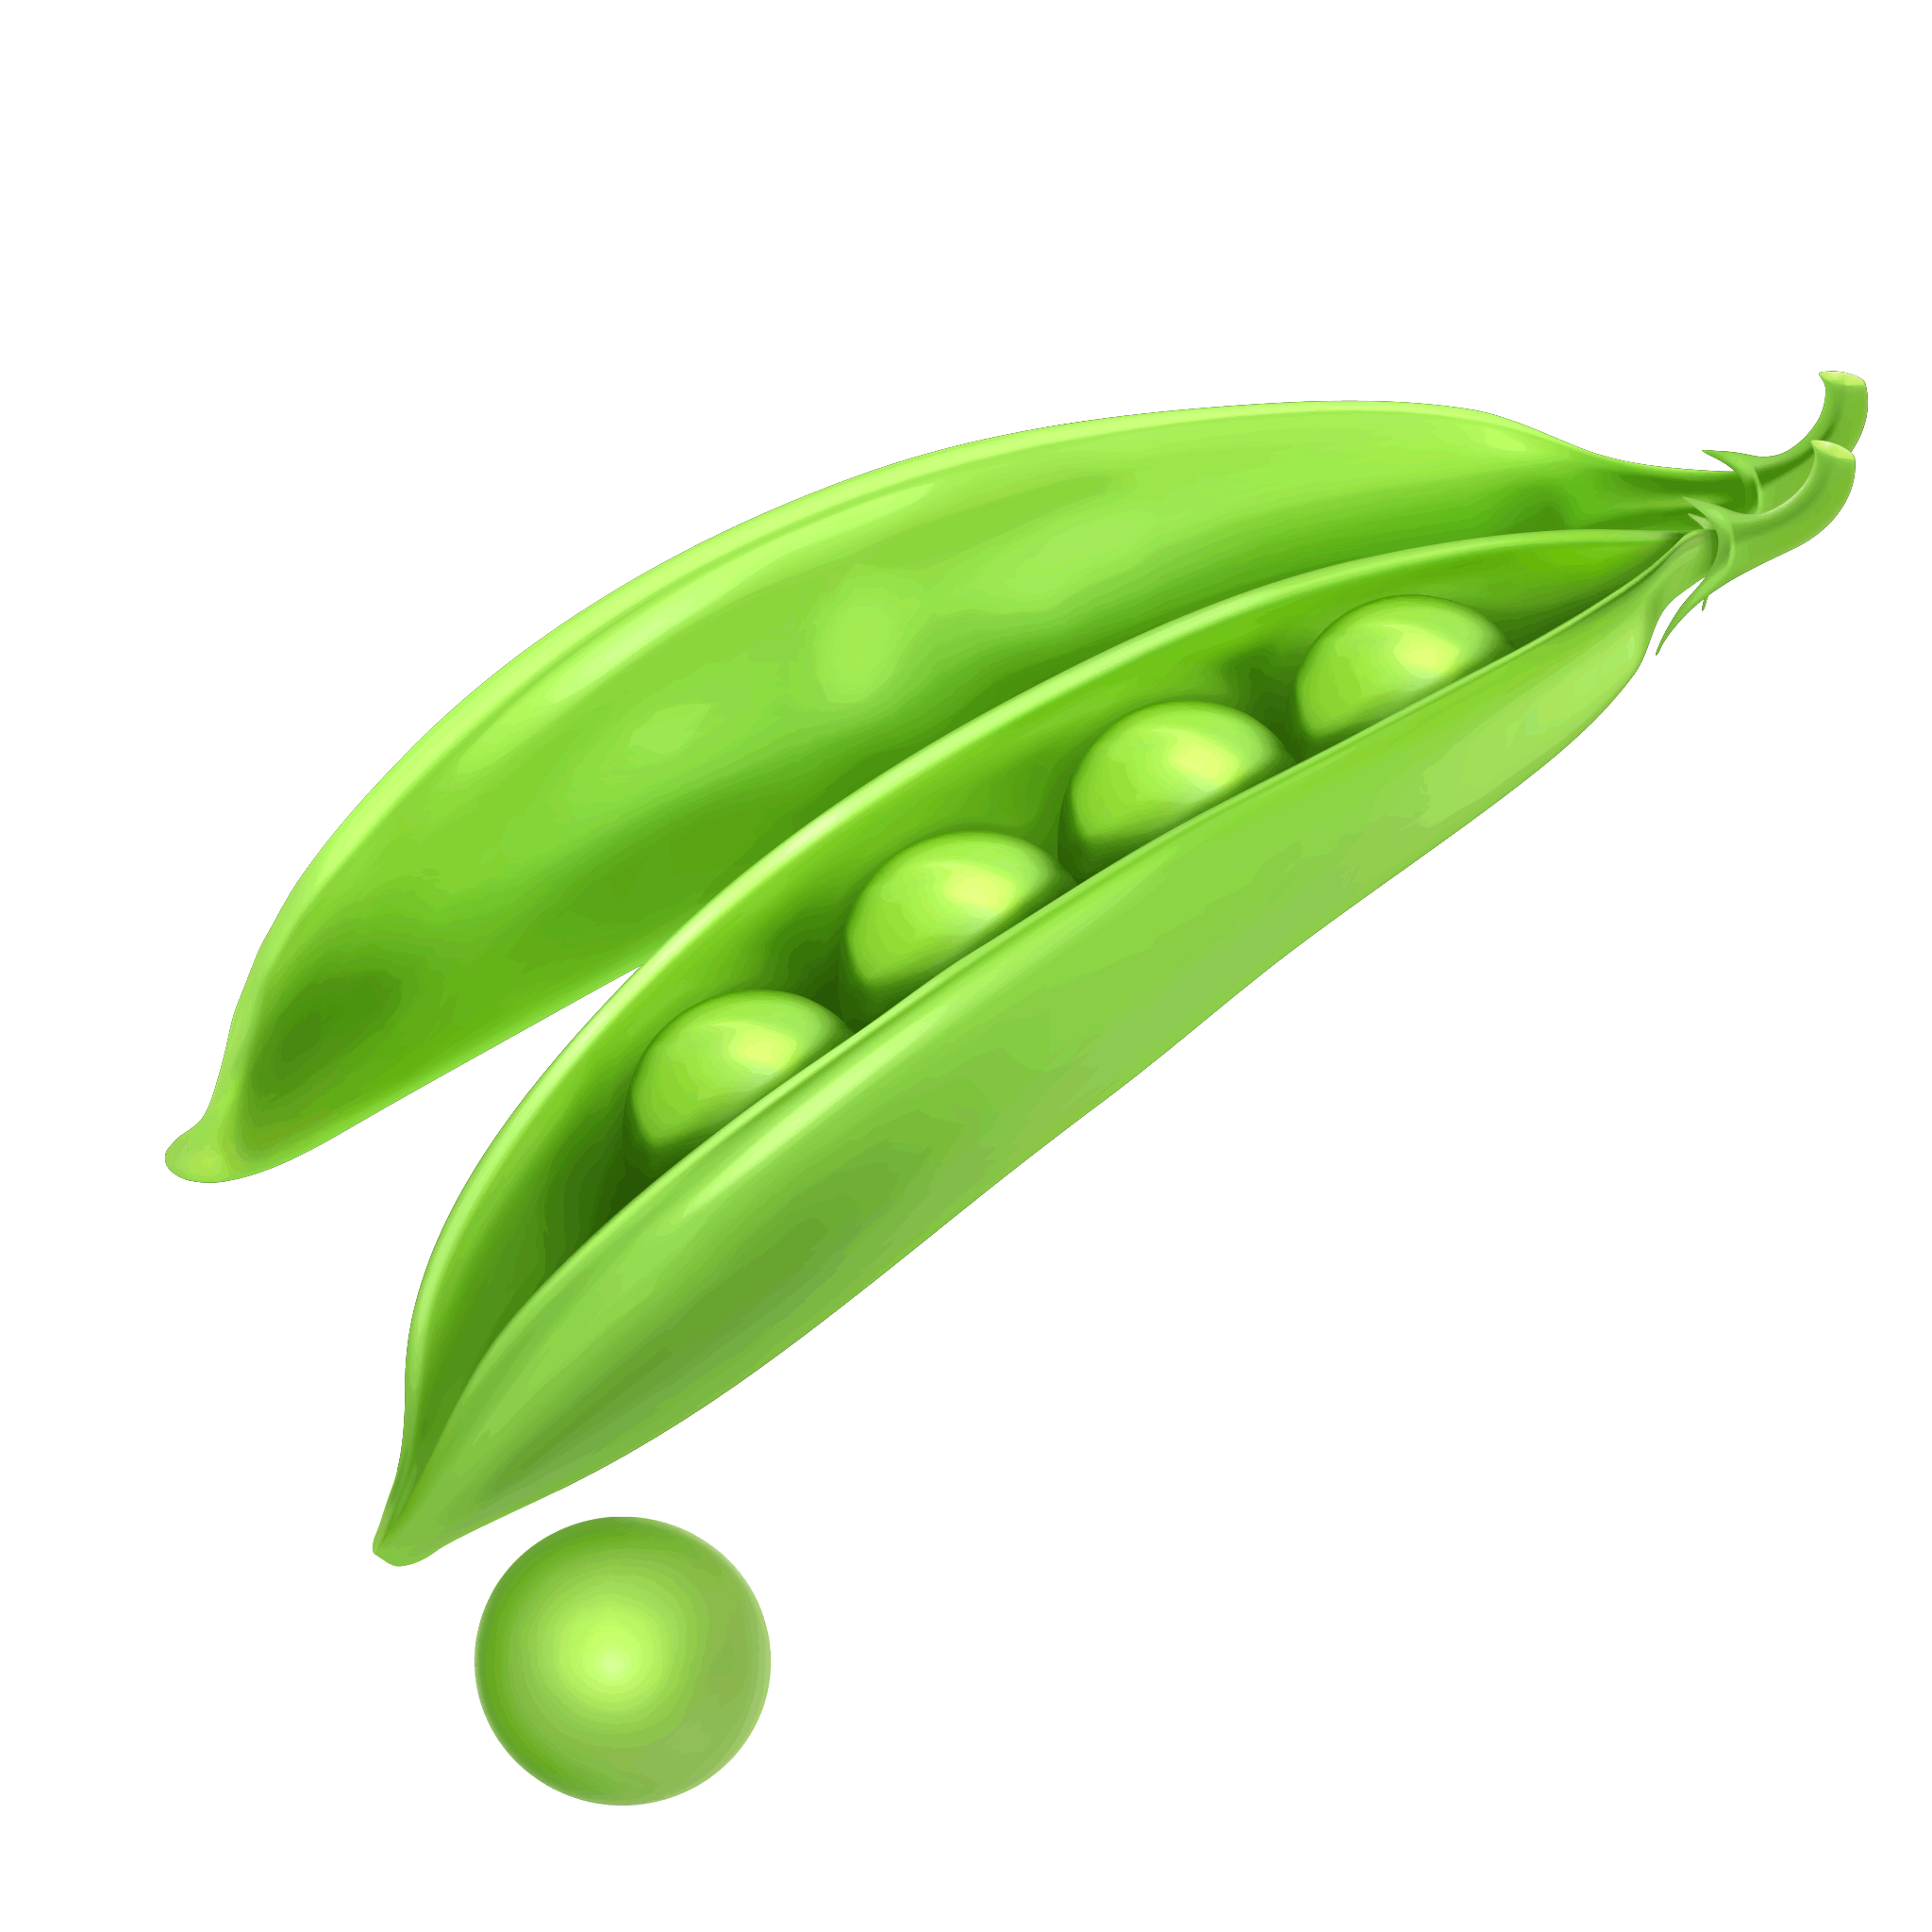 Peas PNG Background